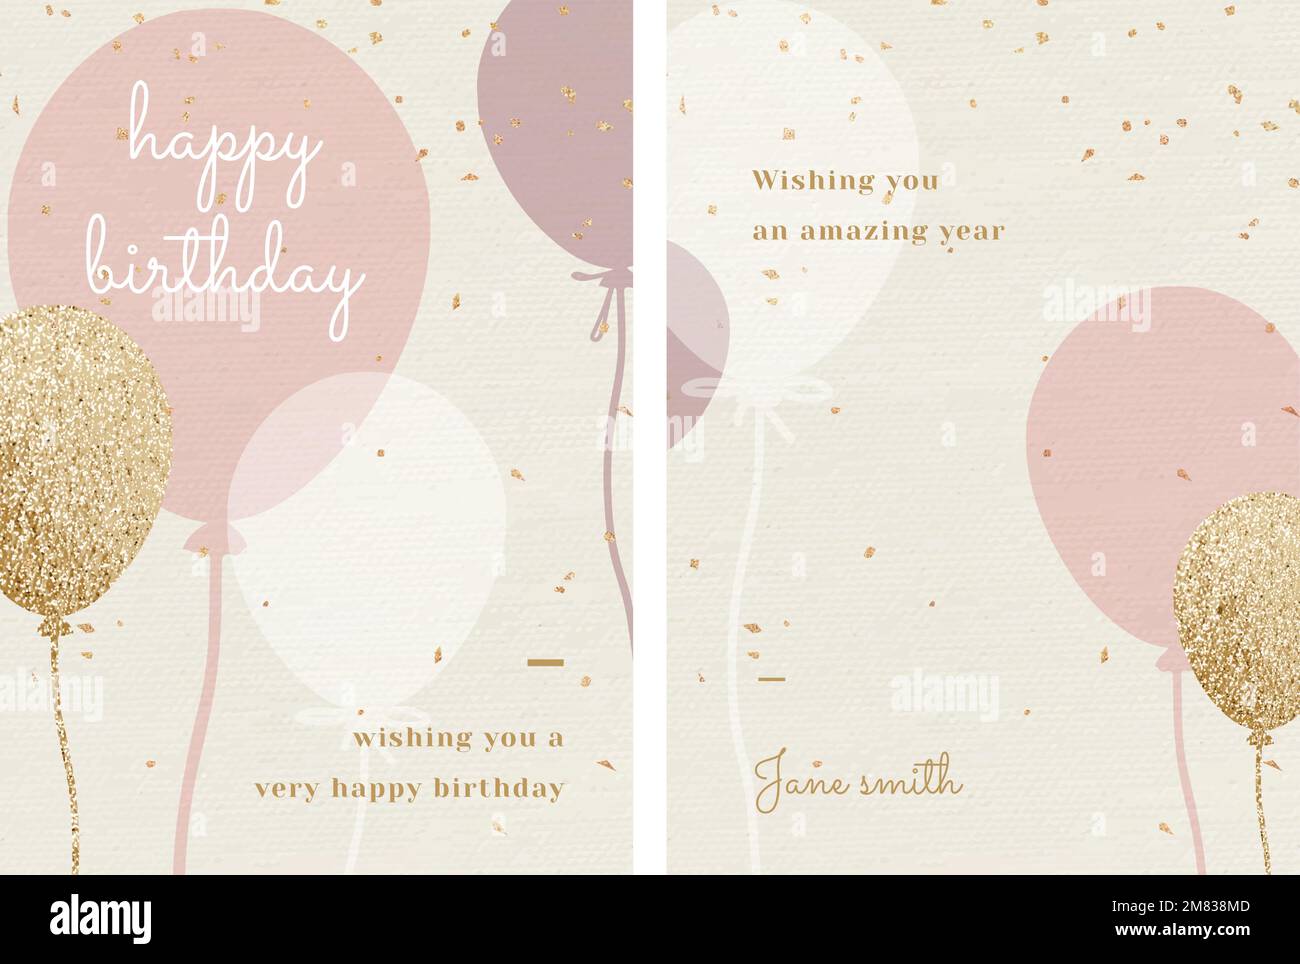 Online birthday greeting template vector with pink and gold balloon illustration set Stock Vector